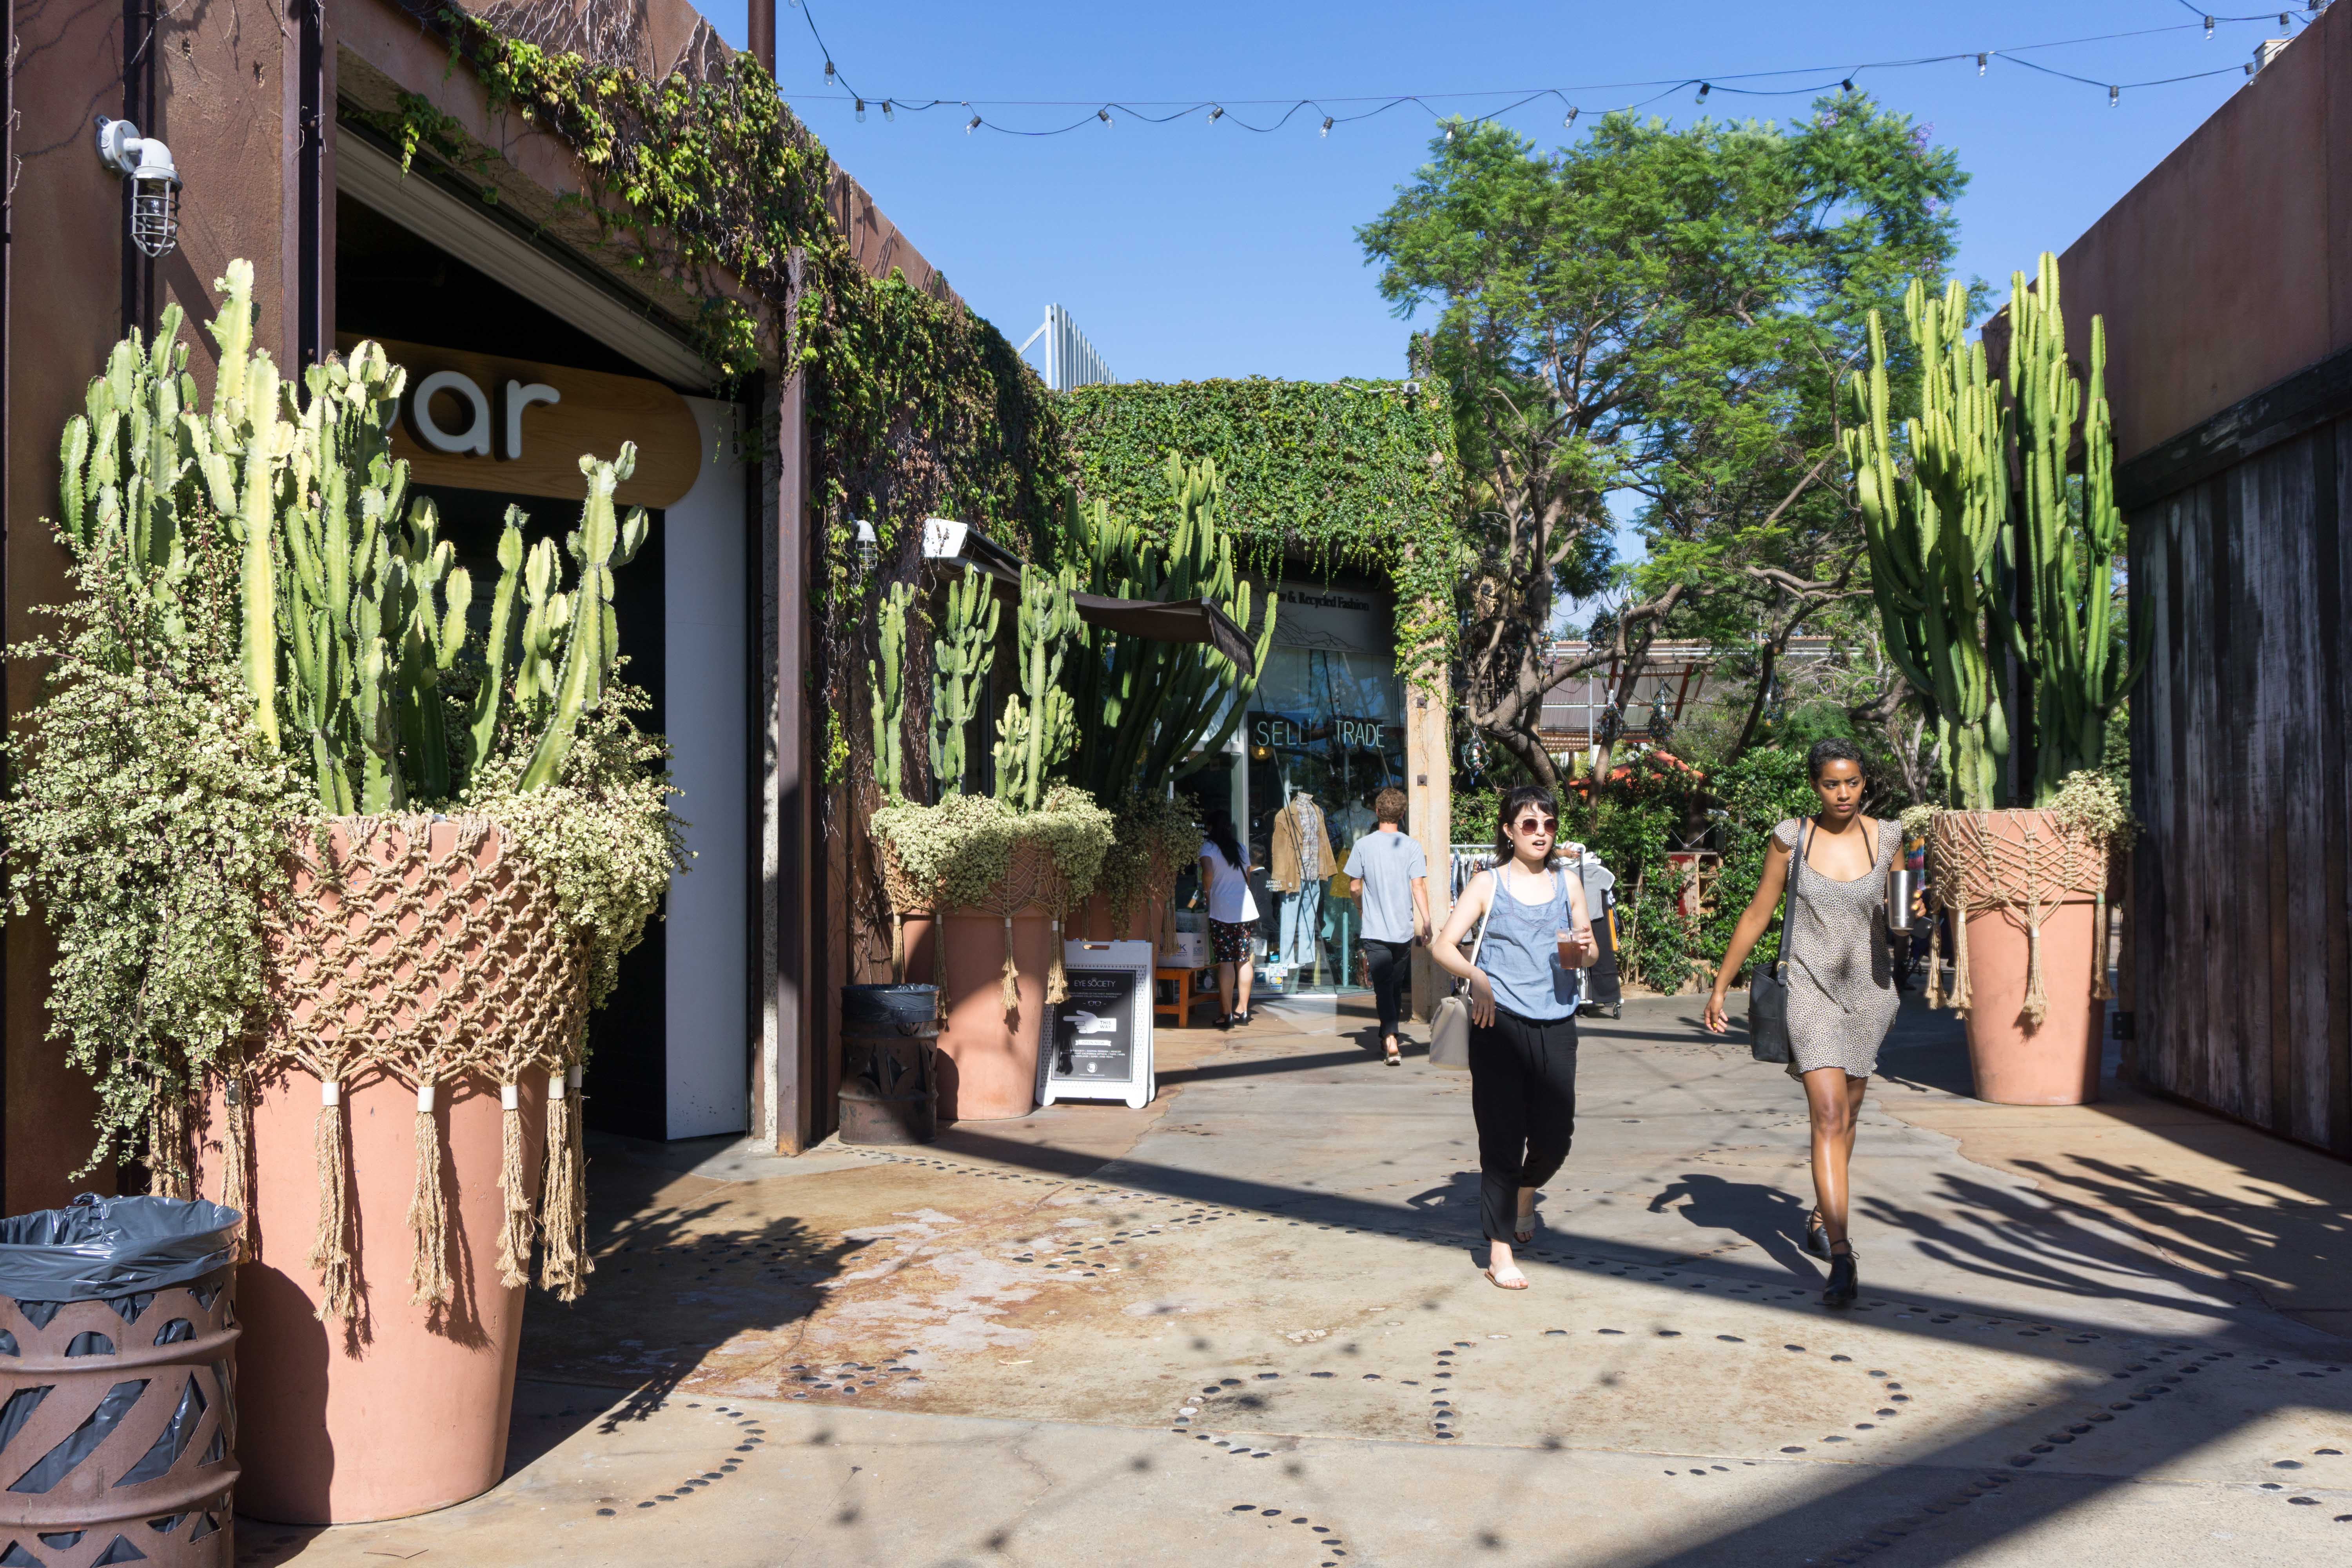 In Costa Mesa, California, a Shopping Mall That Thinks Small